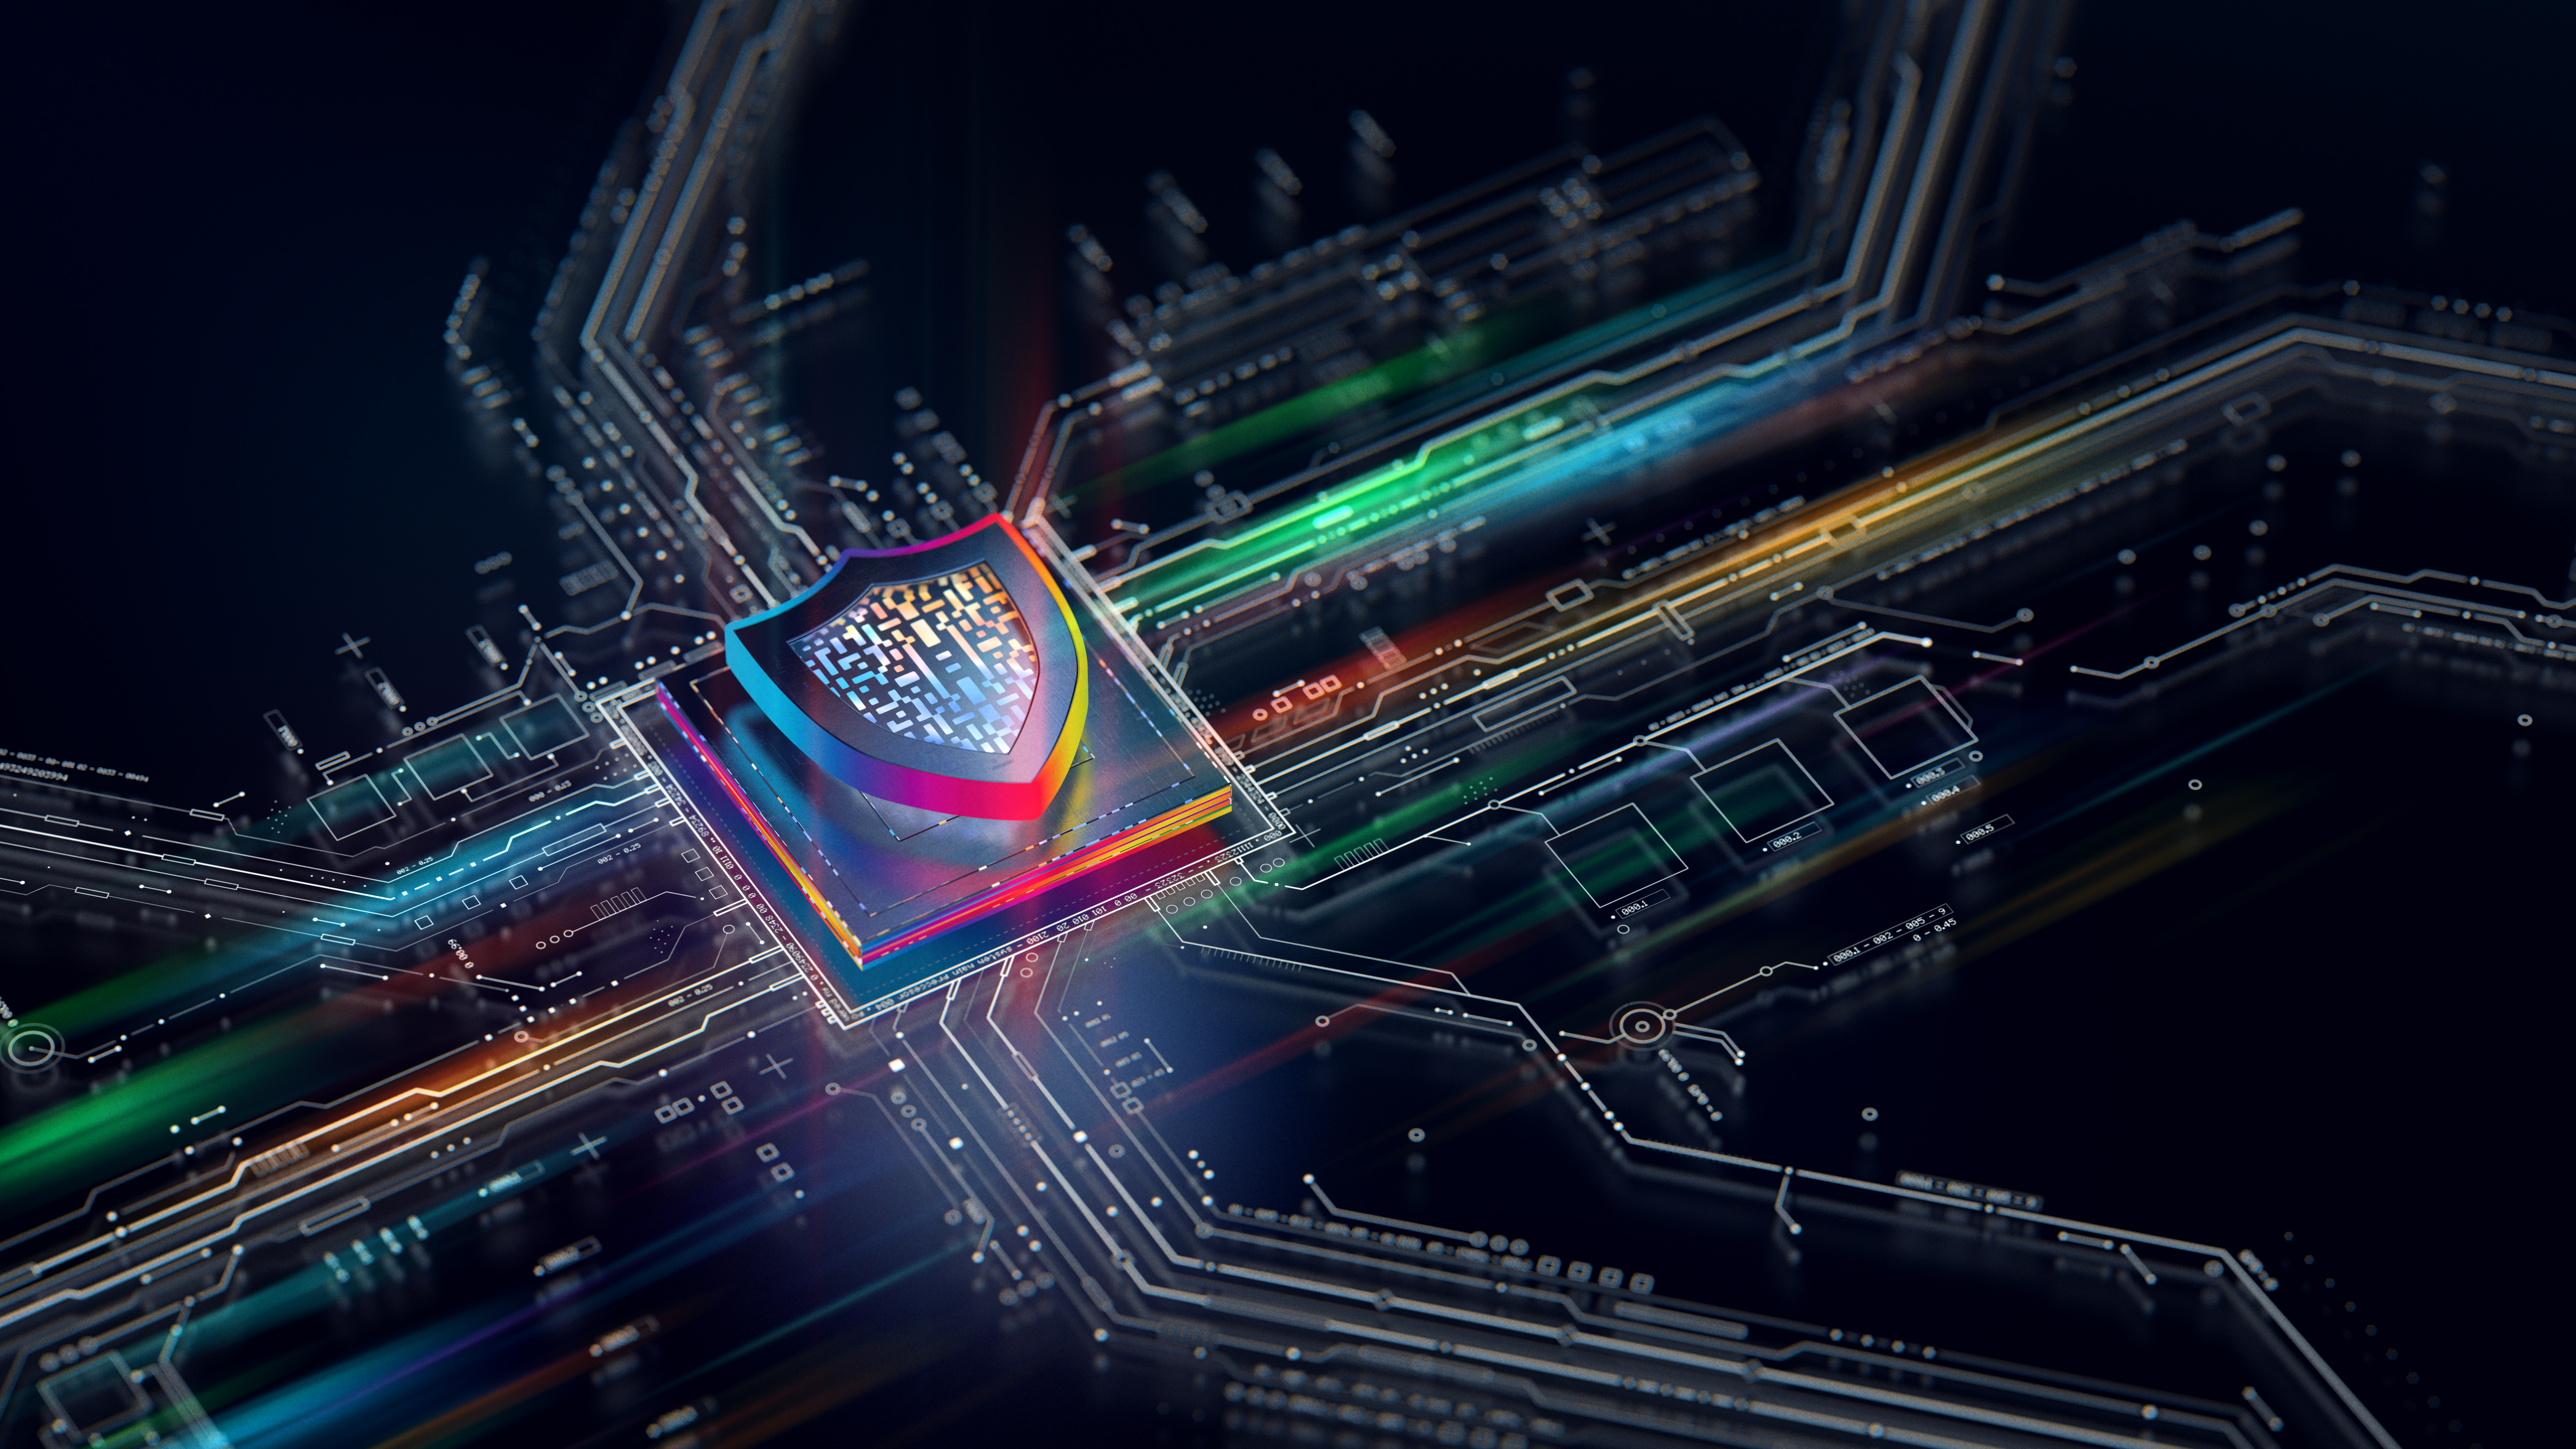 A partially lit-up circuit board schematic on a black background with a raised, 3D CPU in the middle, shining in multiple hues of neon lights and a 3D shield rendering on top of that in the same multihued neon glow. Image credit: Getty Images.